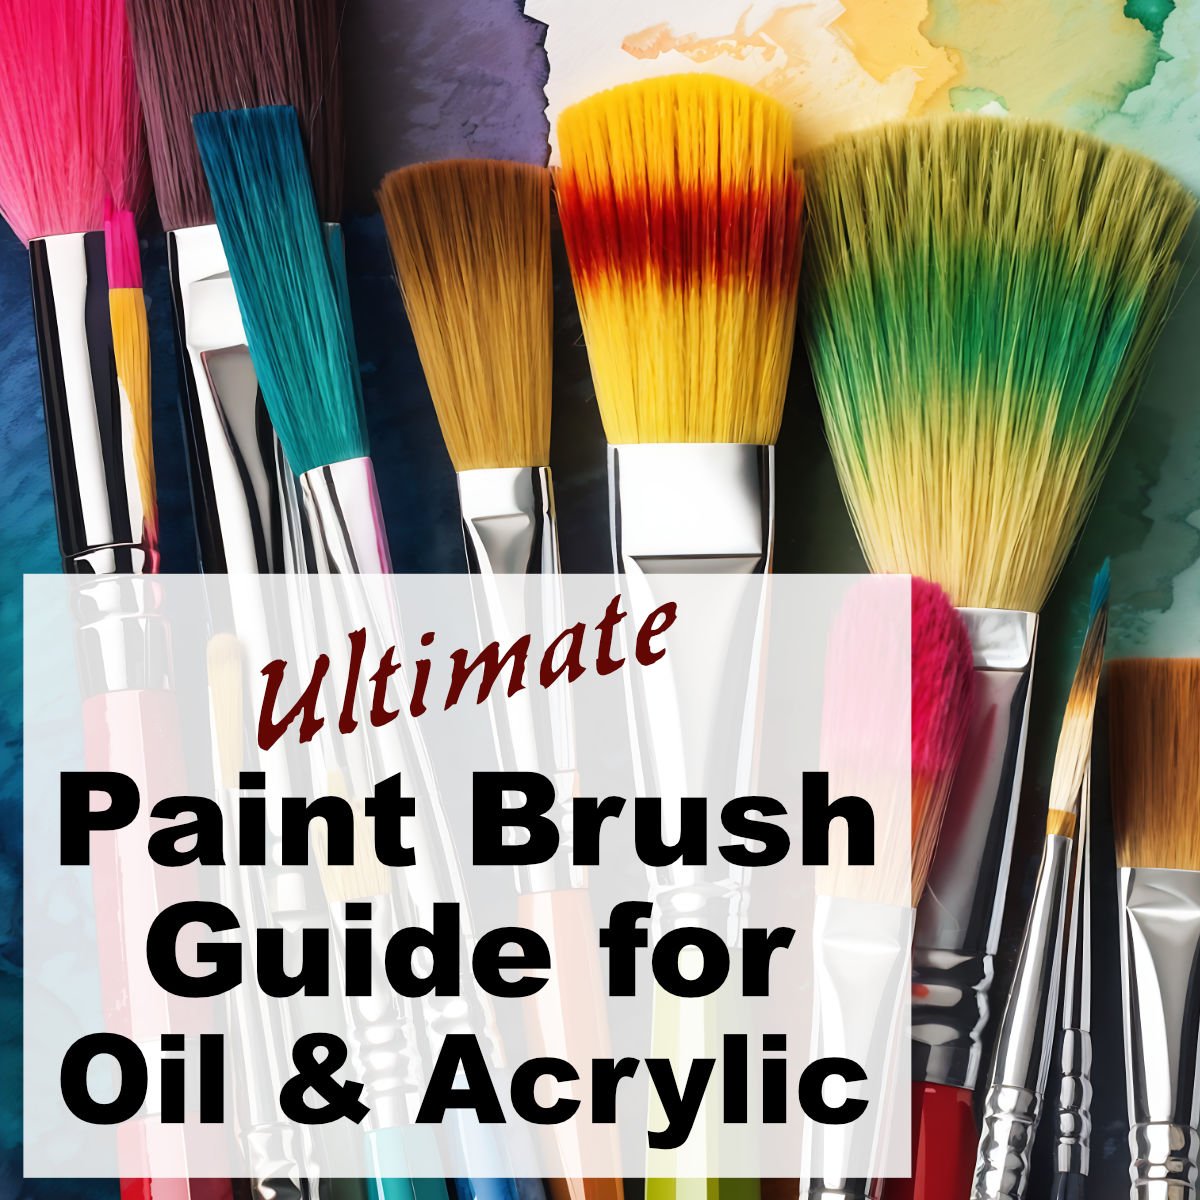 Guide to Paint Brushes in Oil and Acrylic Painting
onlineartlessons.com/tutorial/guide…
#PaintBrushes, #OilPainting, #AcrylicArt, #ArtTips, #CreativeTools